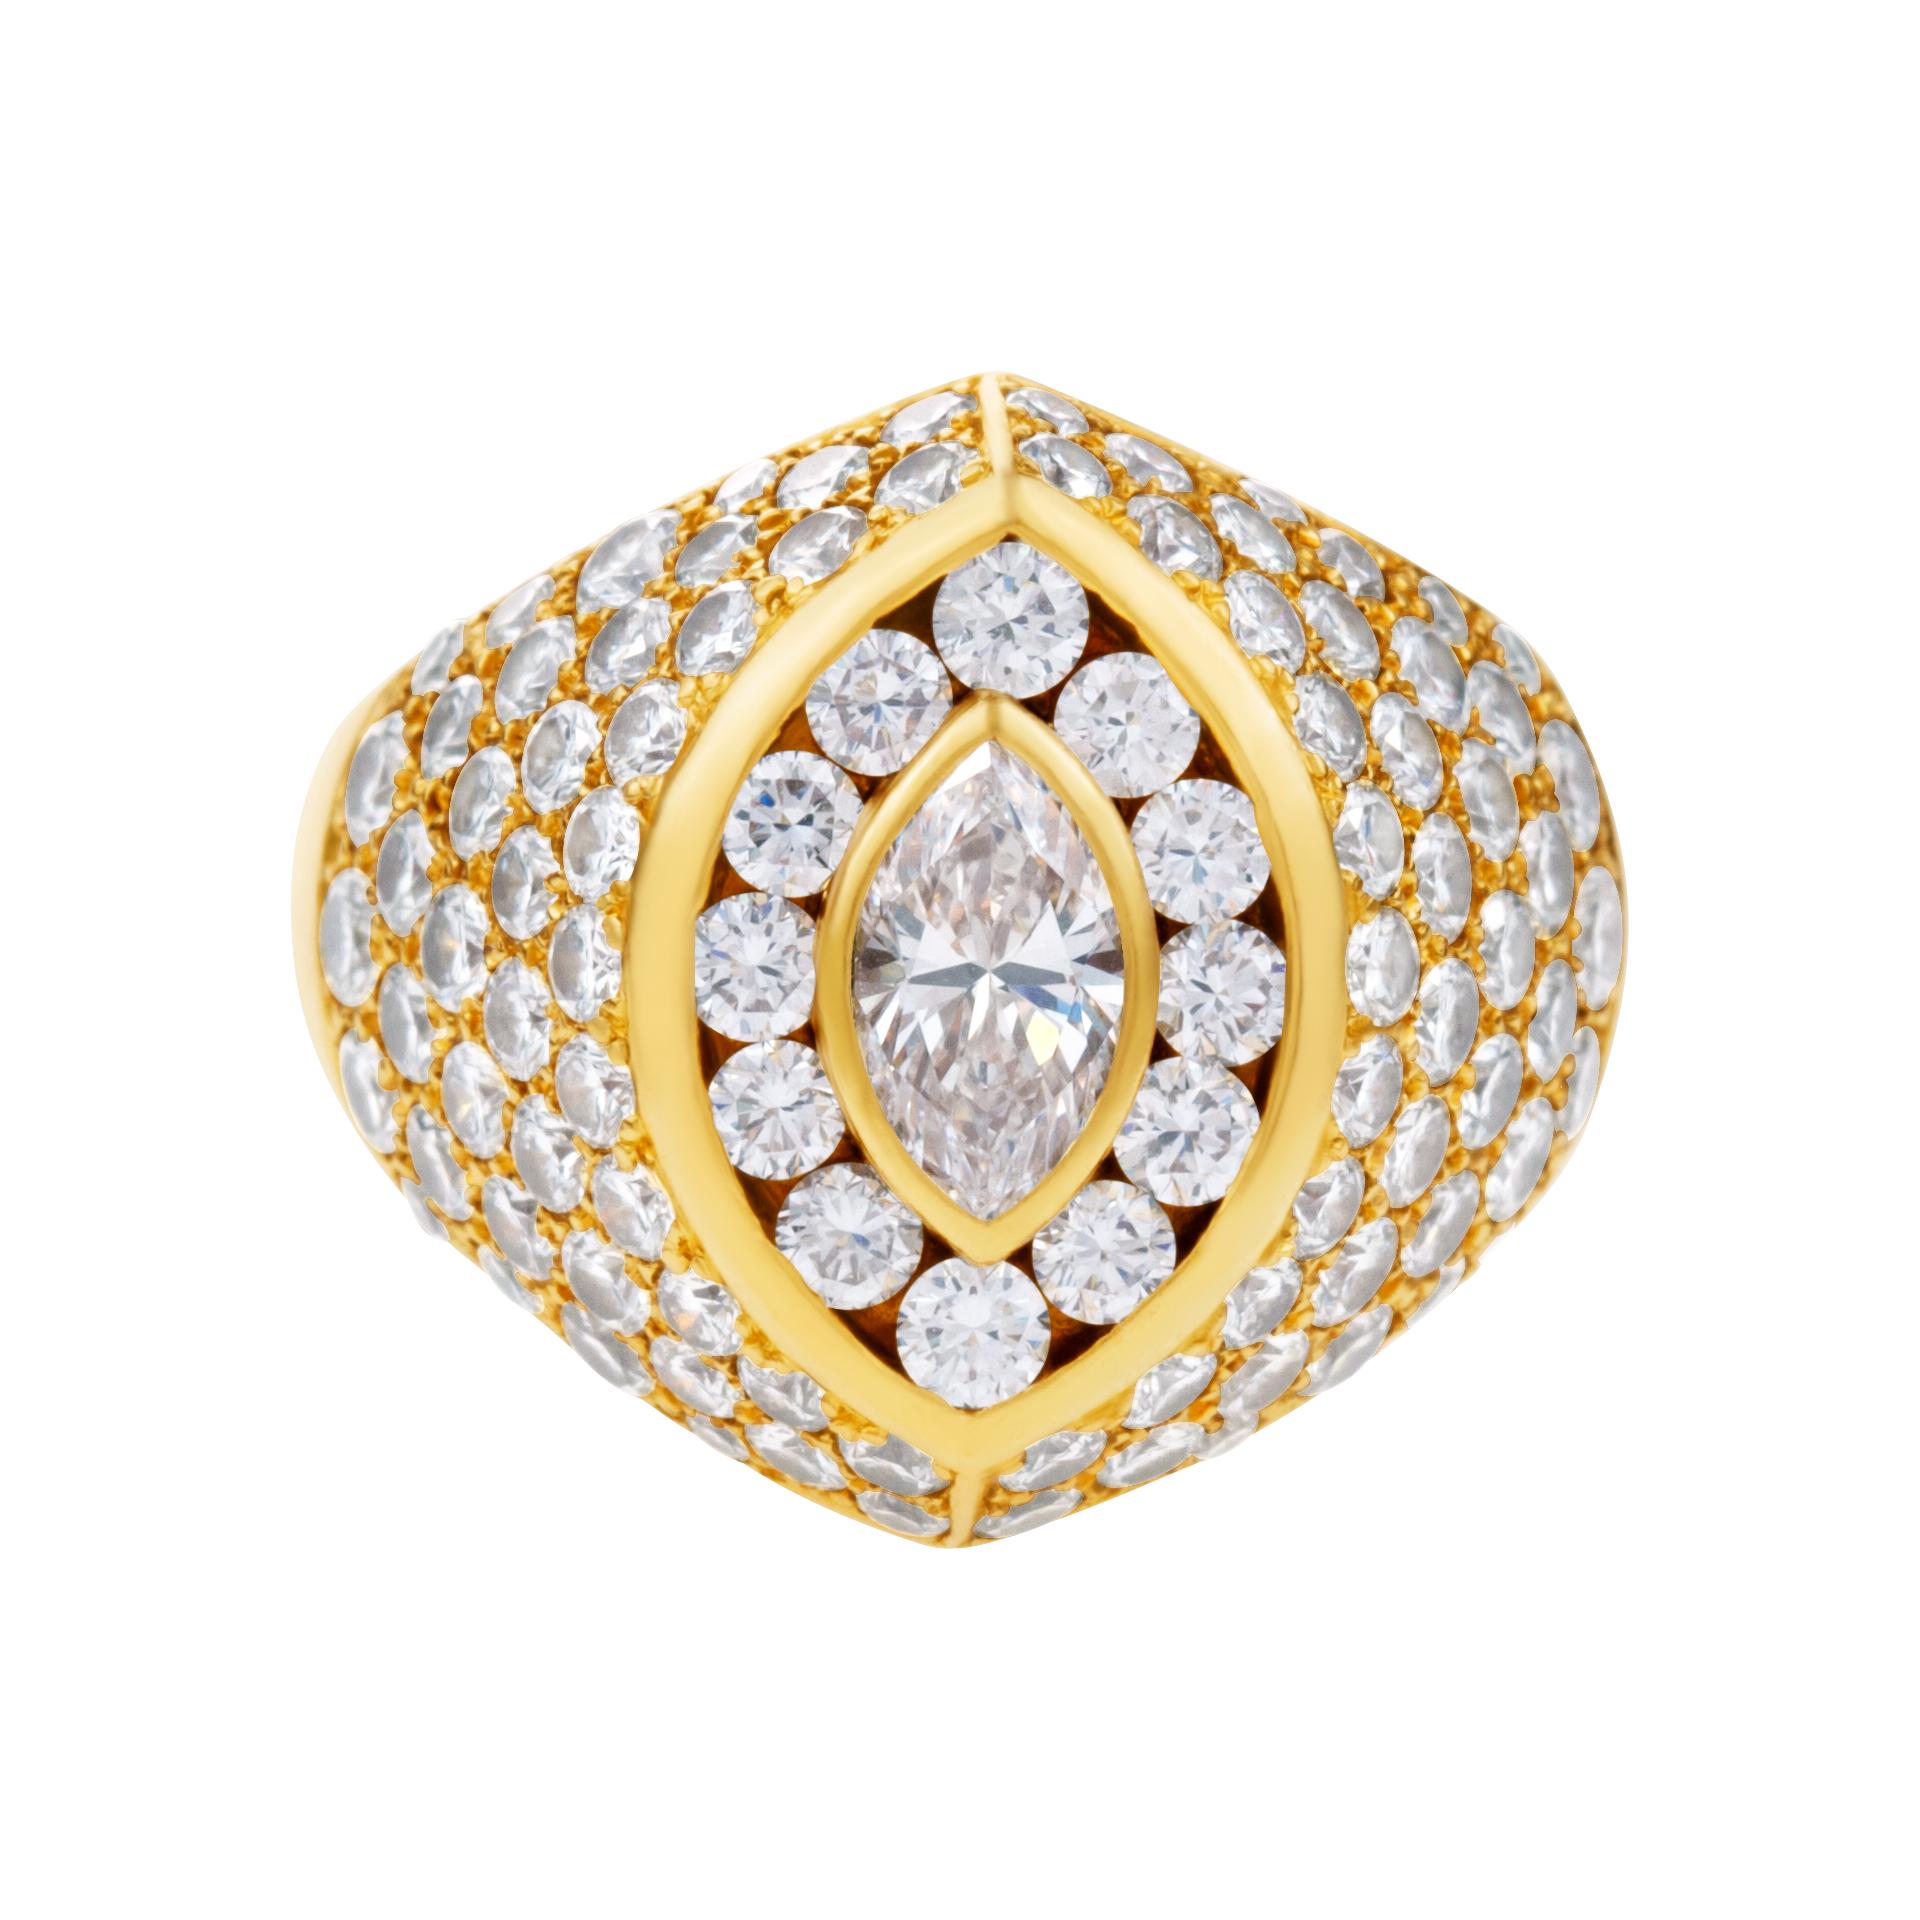 Kutchinsky 18K yellow gold pave diamond ring with center 0.50 carat marquise diamond with a total of 4 carats in E-F color, VVS clarity. Size 7.25.This Diamond ring is currently size 7.25 and some items can be sized up or down, please ask! It weighs